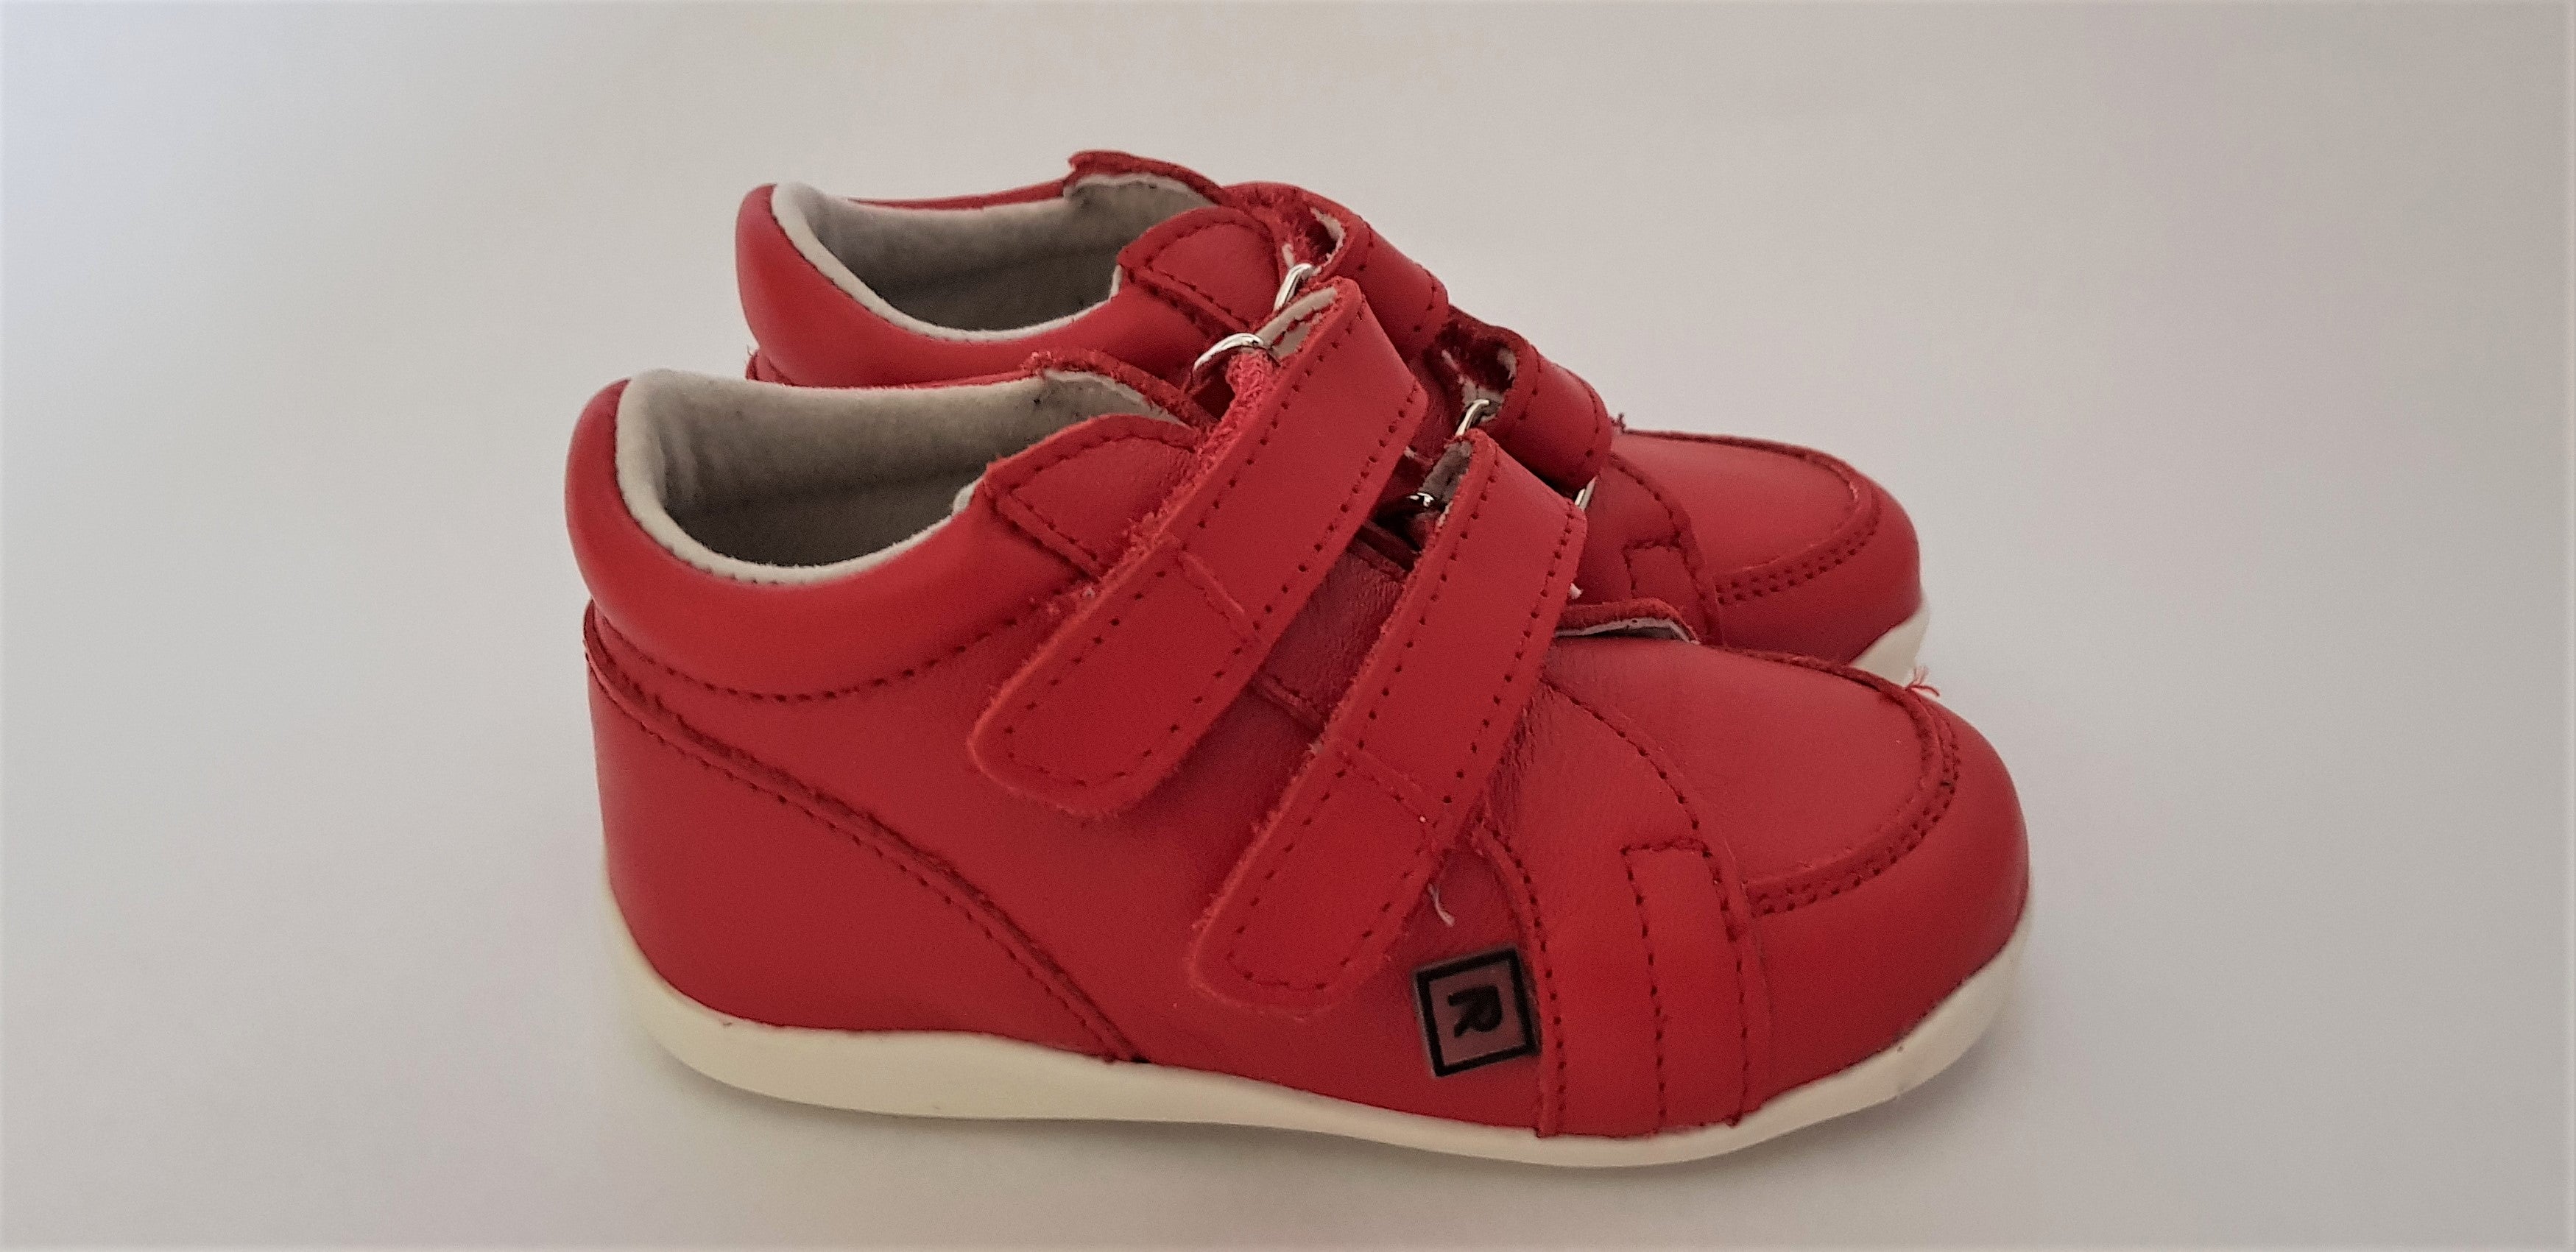 Red First Walking Shoes for Toddlers made from soft leather with hood-and-loop fastener and round toe box